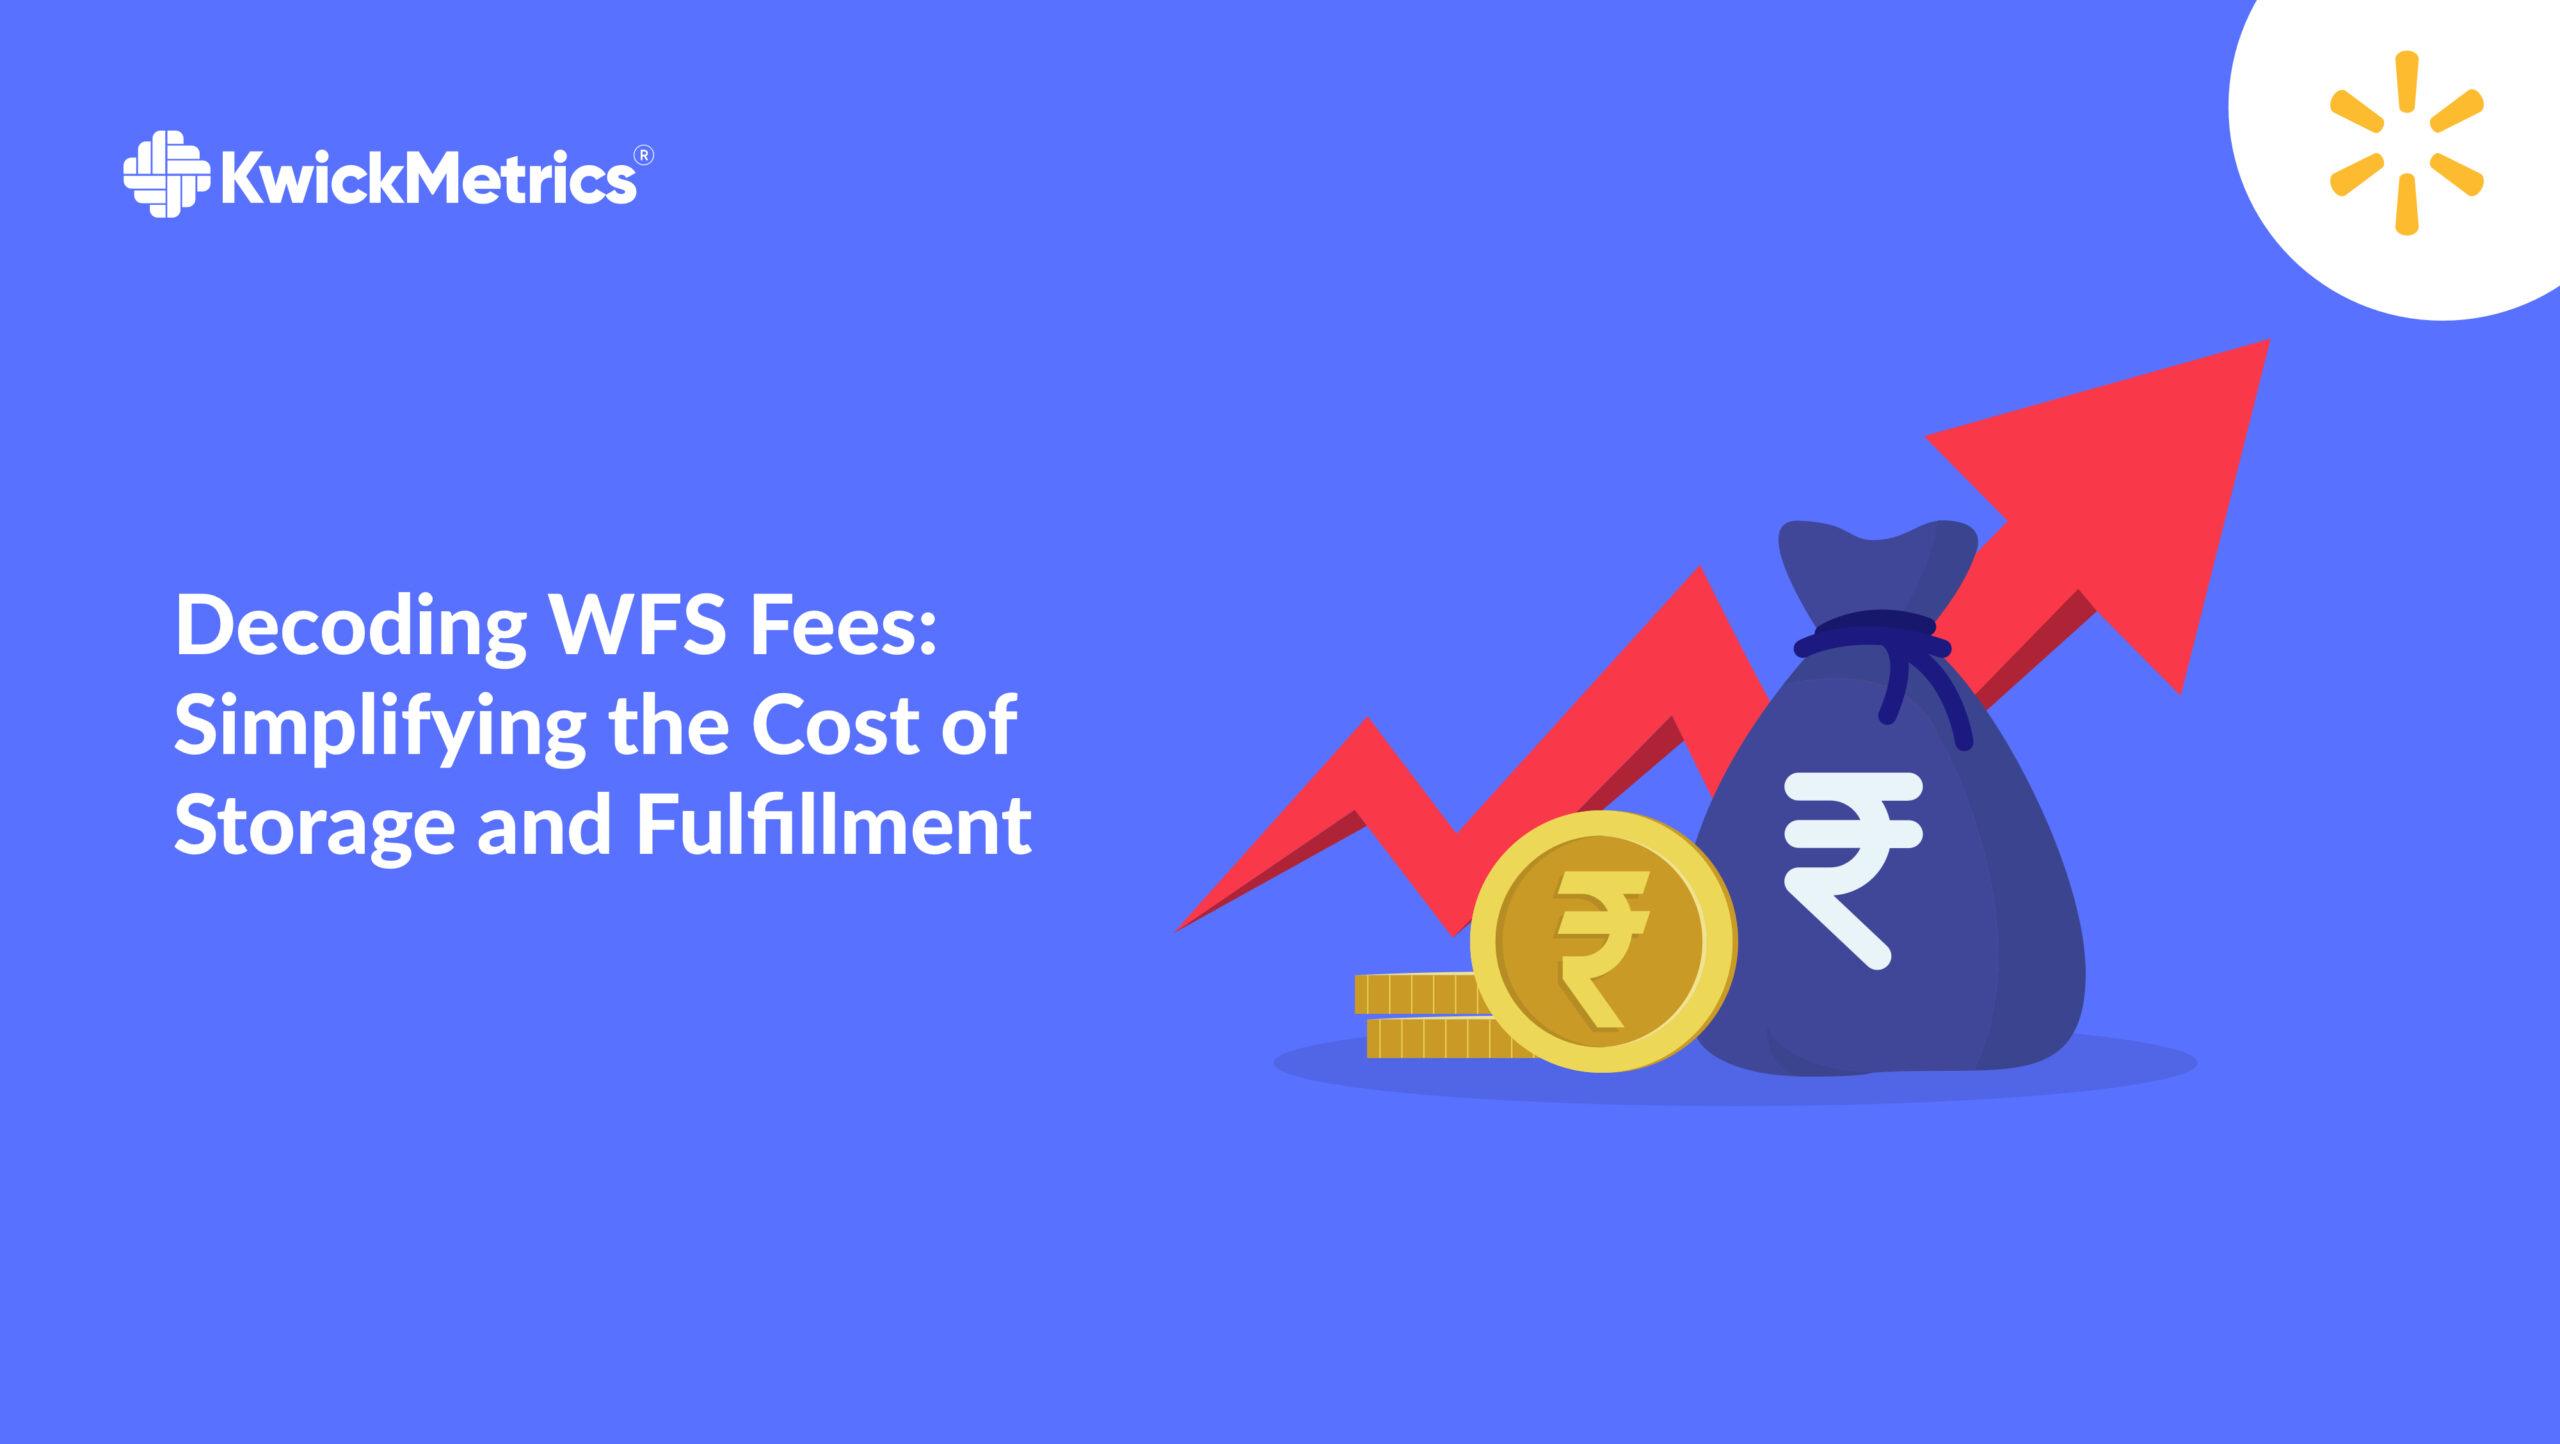 Decoding WFS Fees: Simplifying the Cost of Storage & Fulfillment